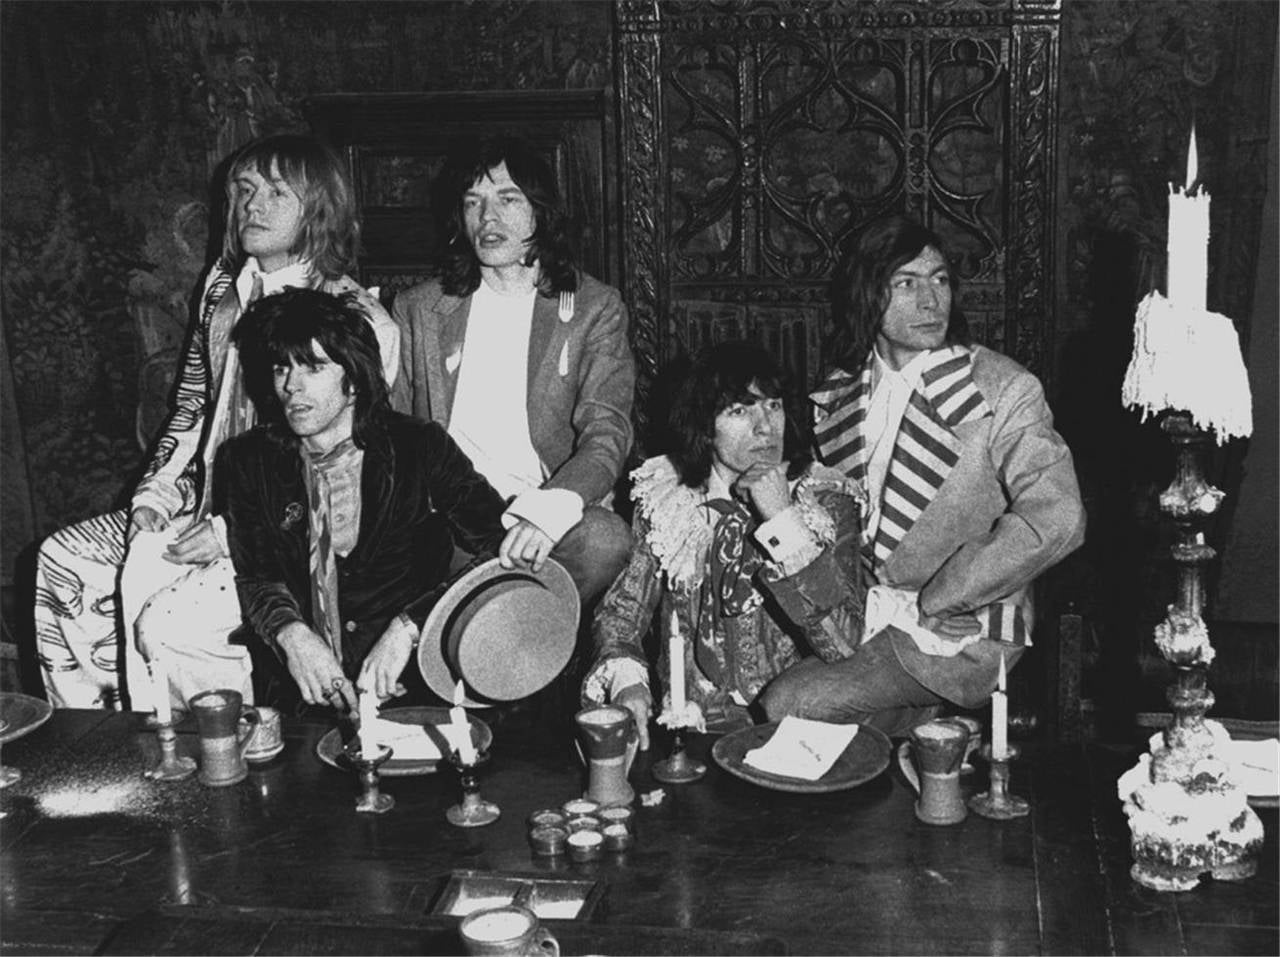 Barrie Wentzell Black and White Photograph - The Rolling Stones, Beggars Banquet, Kensington, London